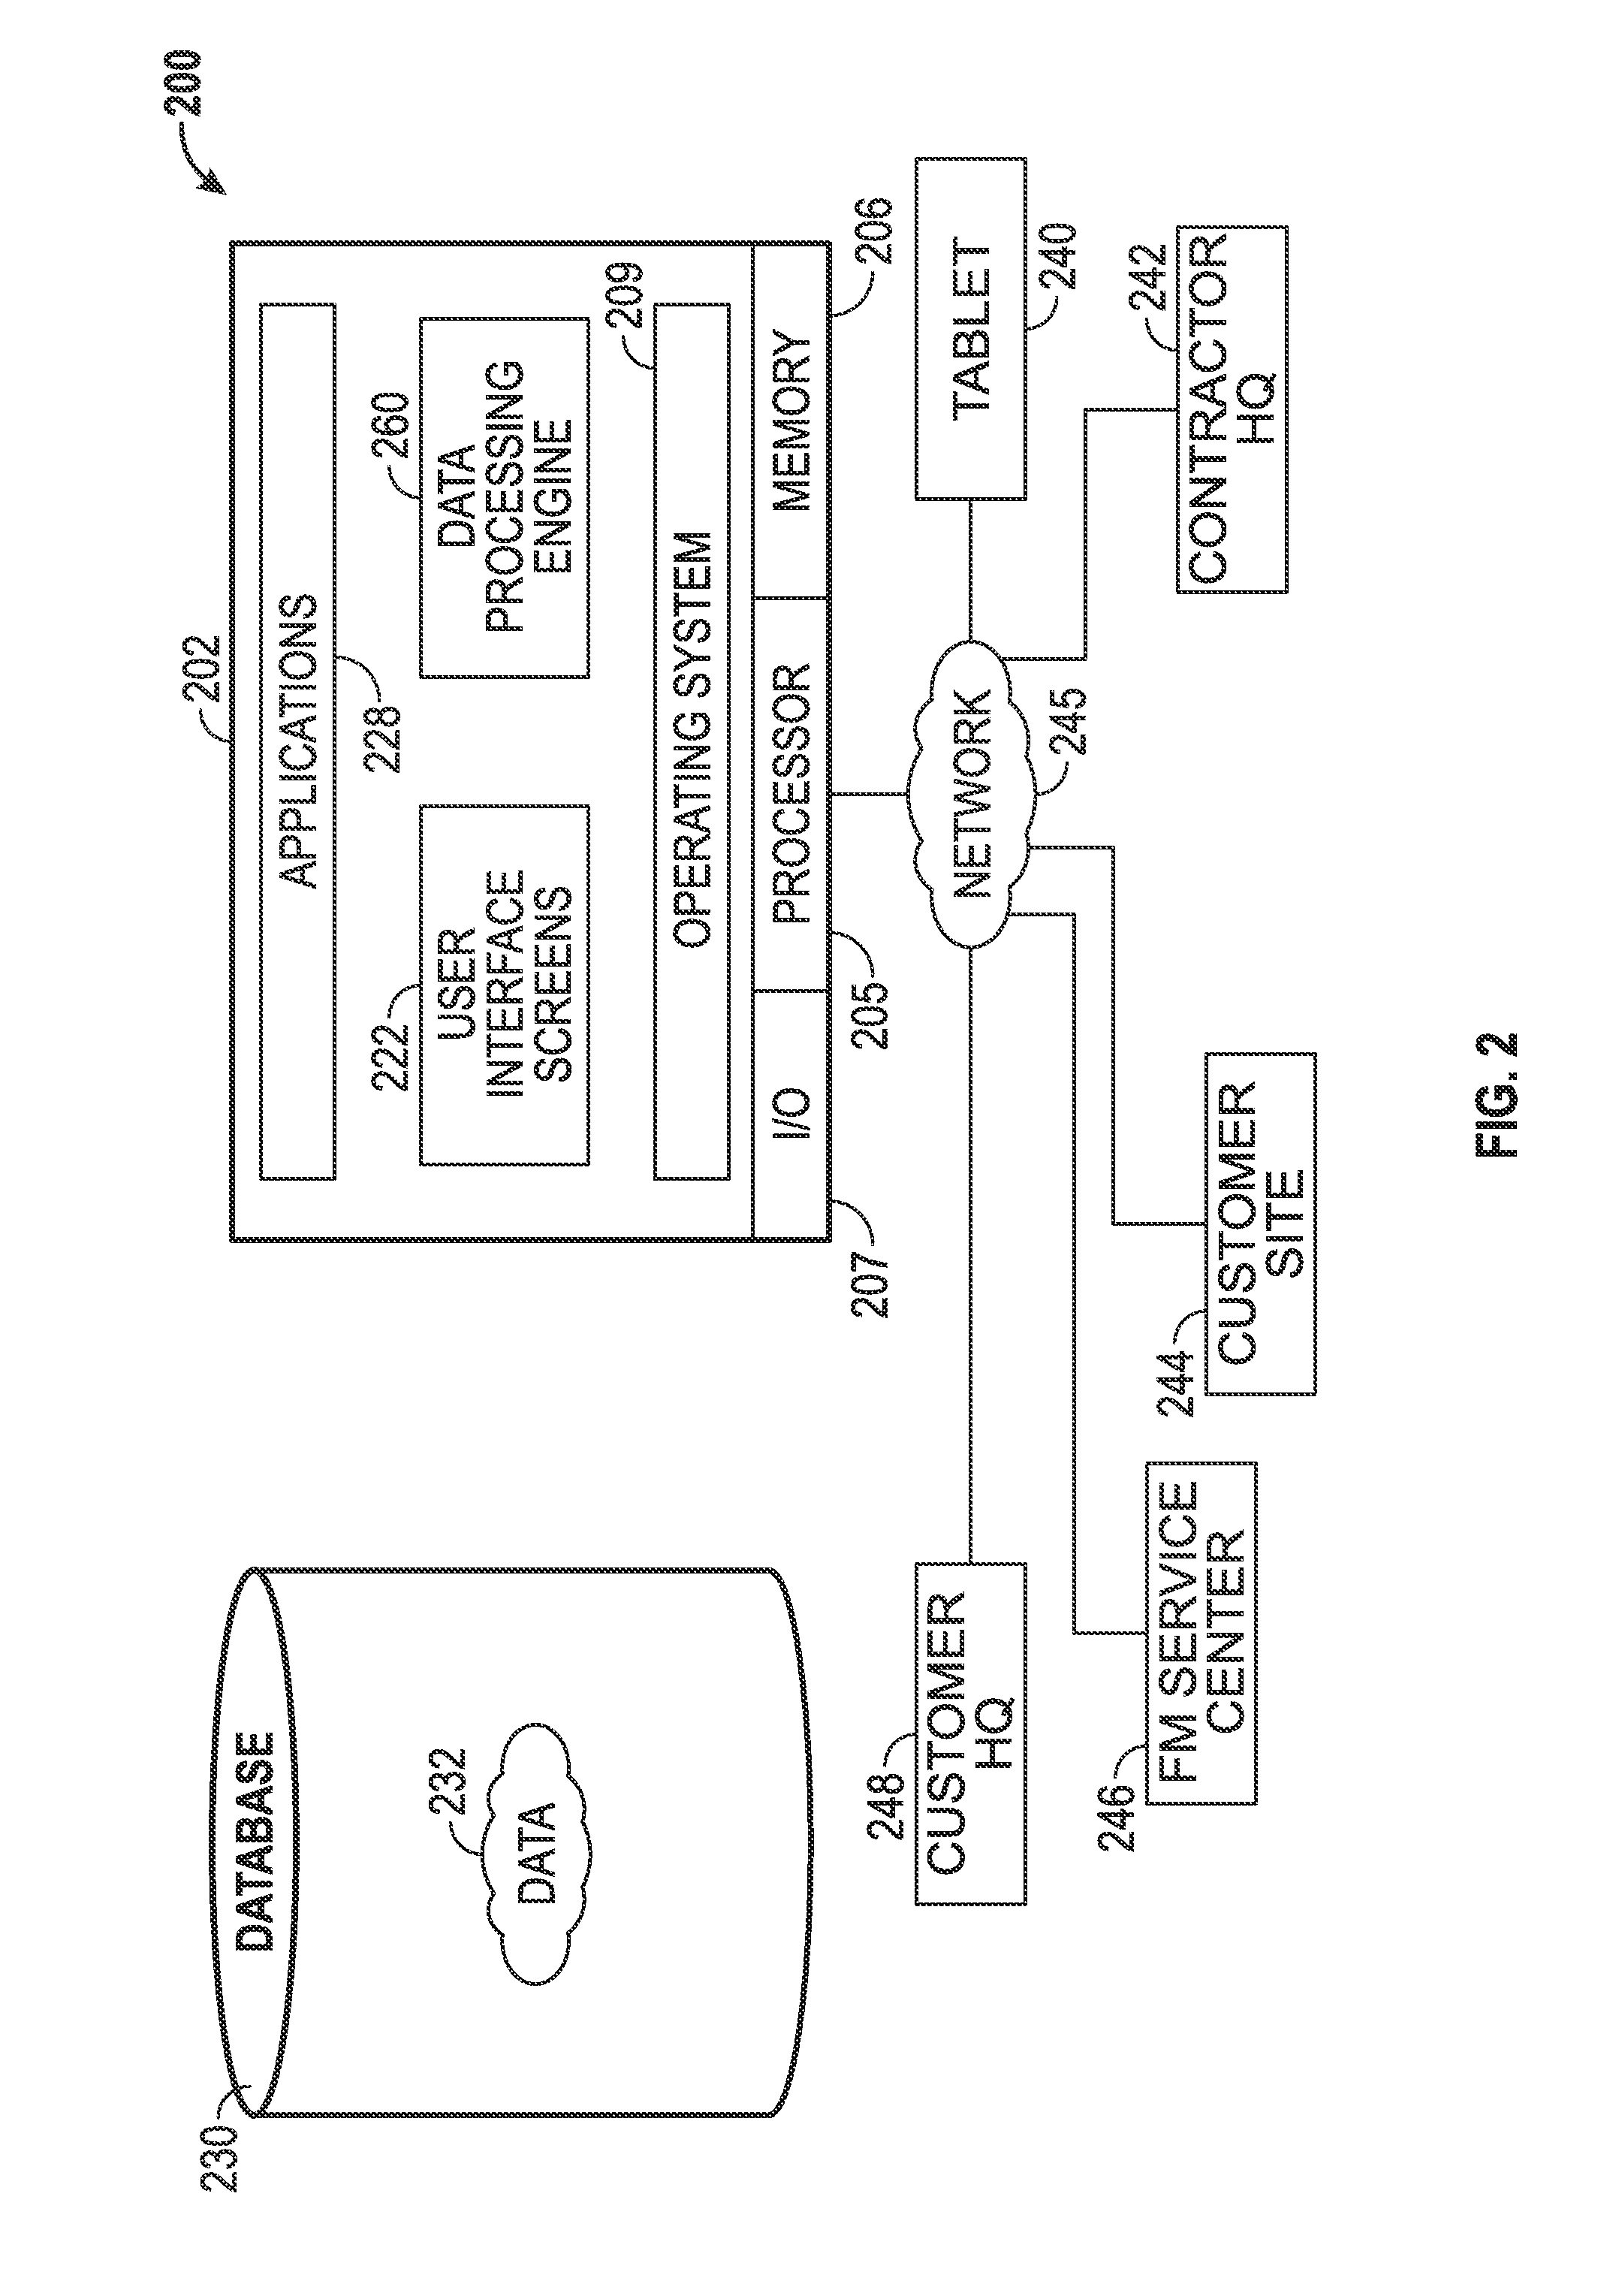 System and method for controlling the elements of parts and labor costs in a facilities management computing environment